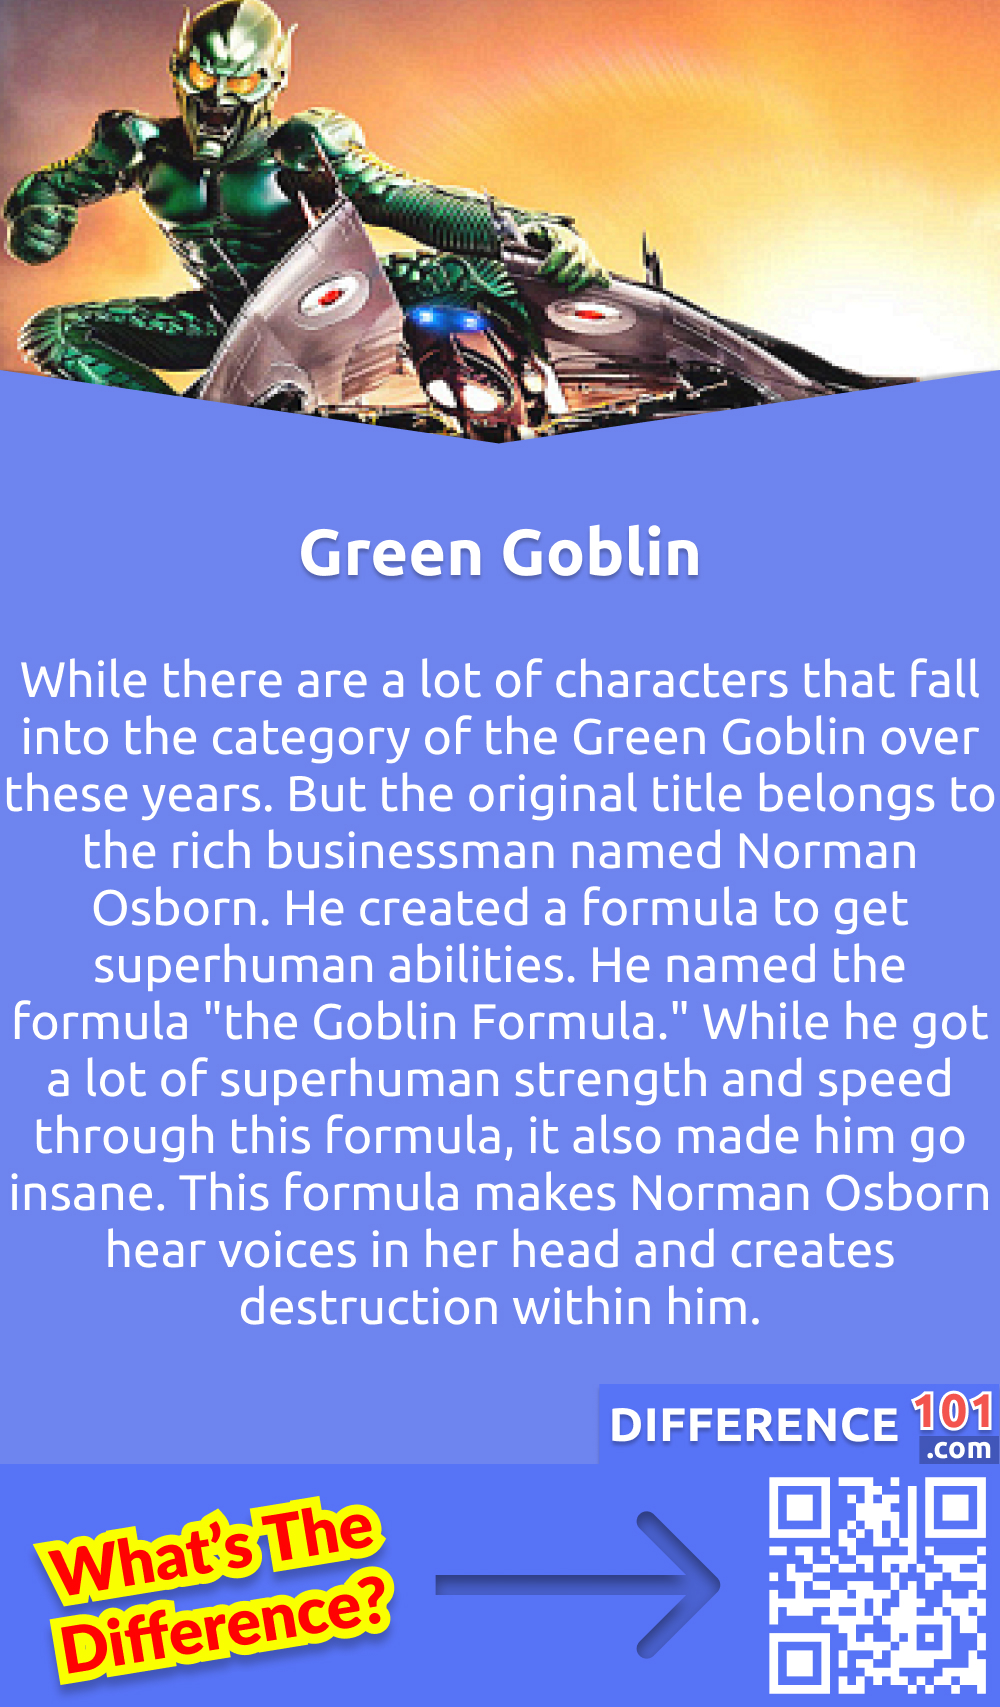 What Is a Green Goblin? While there are a lot of characters that fall into the category of the Green Goblin over these years. But the original title belongs to the rich businessman named Norman Osborn. He created a formula to get superhuman abilities. He named the formula "the Goblin Formula." While he got a lot of superhuman strength and speed through this formula, it also made him go insane. This formula makes Norman Osborn hear voices in her head and creates destruction within him. Moreover, Green Goblin did not ally with any other enemies of Spiderman and worked on his own to achieve his mission.